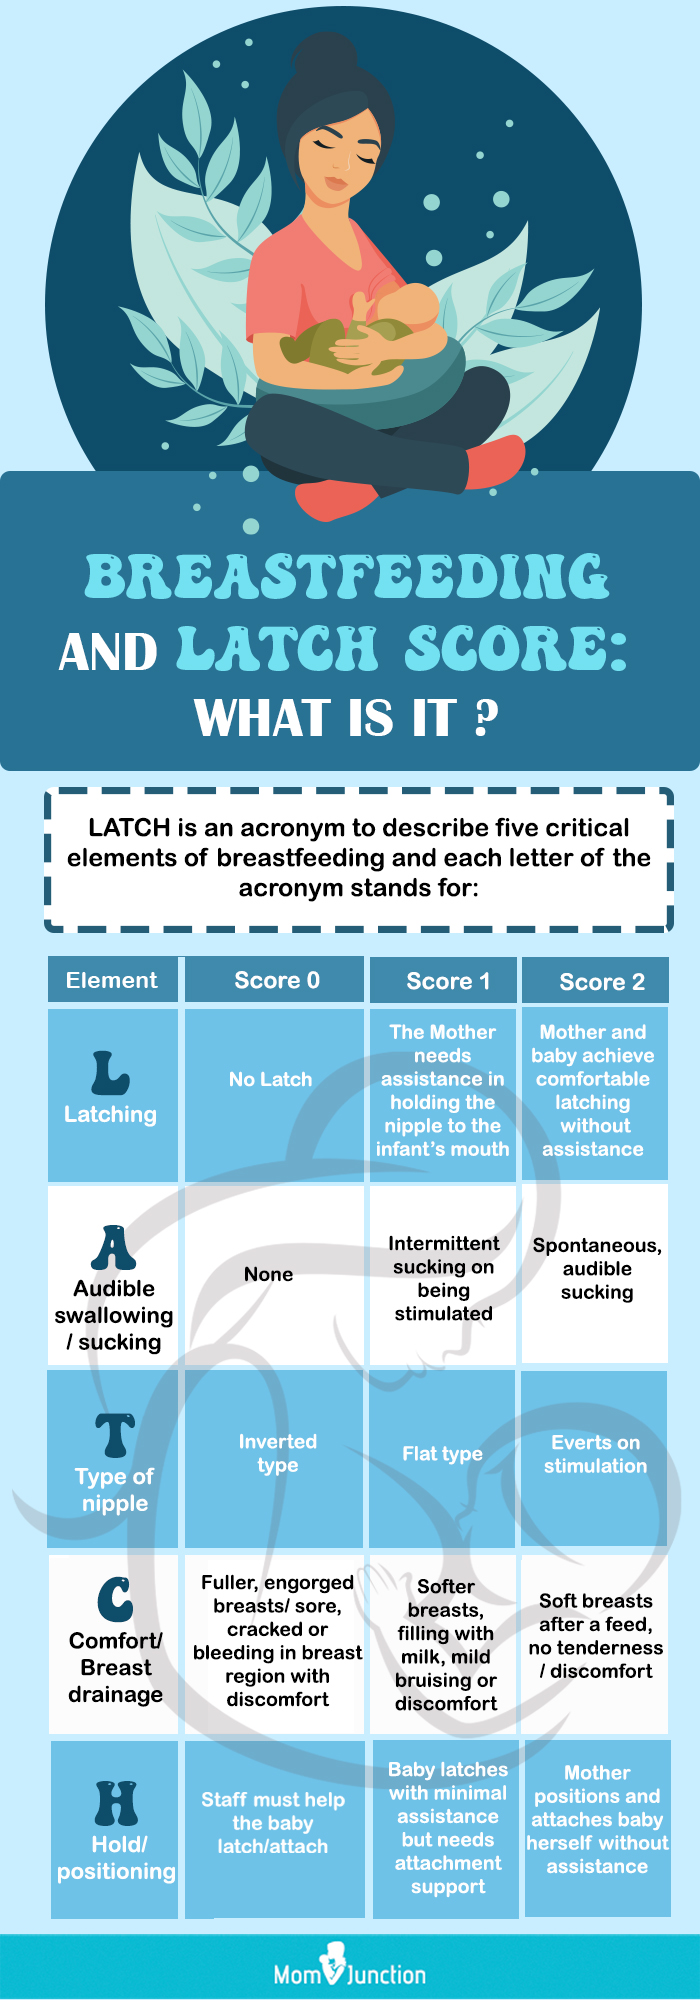 latch scoring system for breastfeeding (infographic)